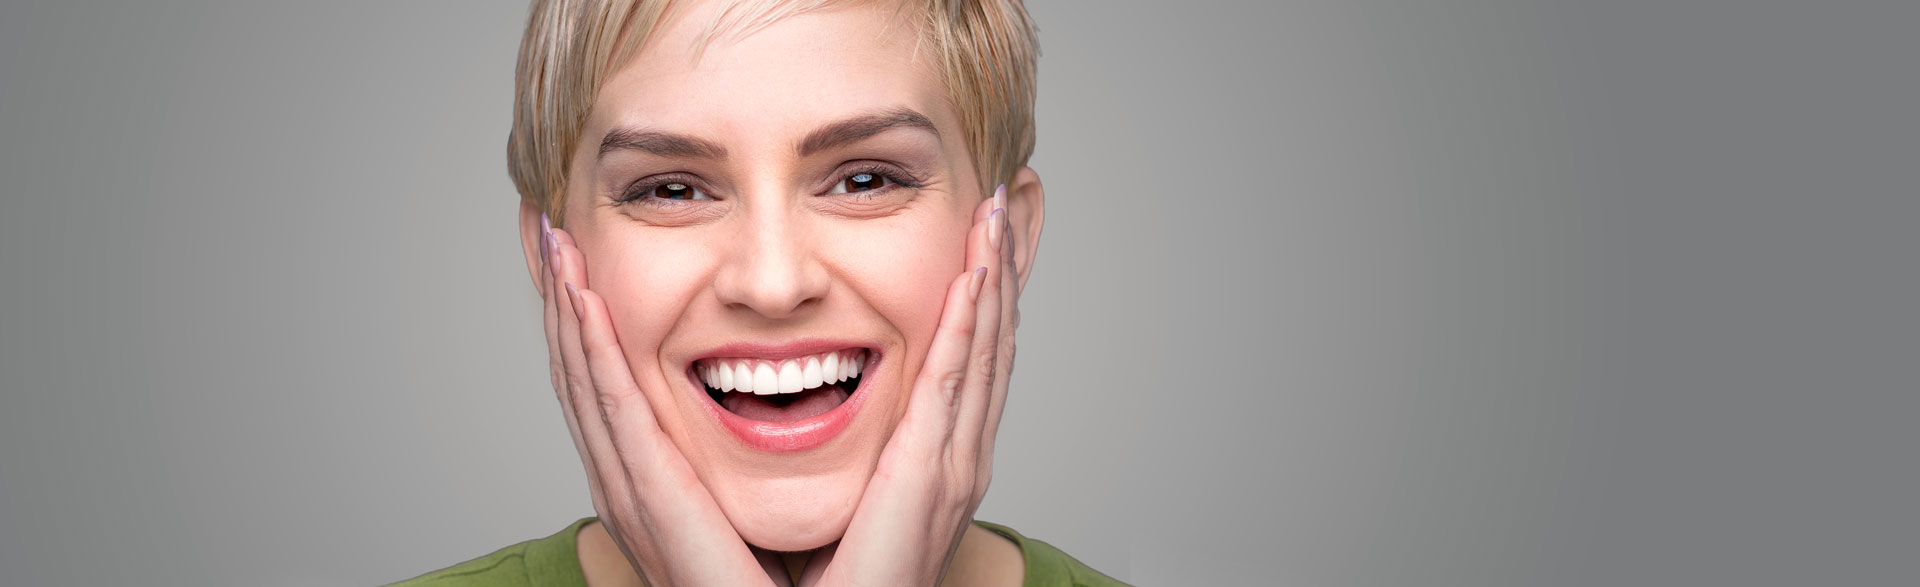 Woman smiling after having tooth bonding treatment